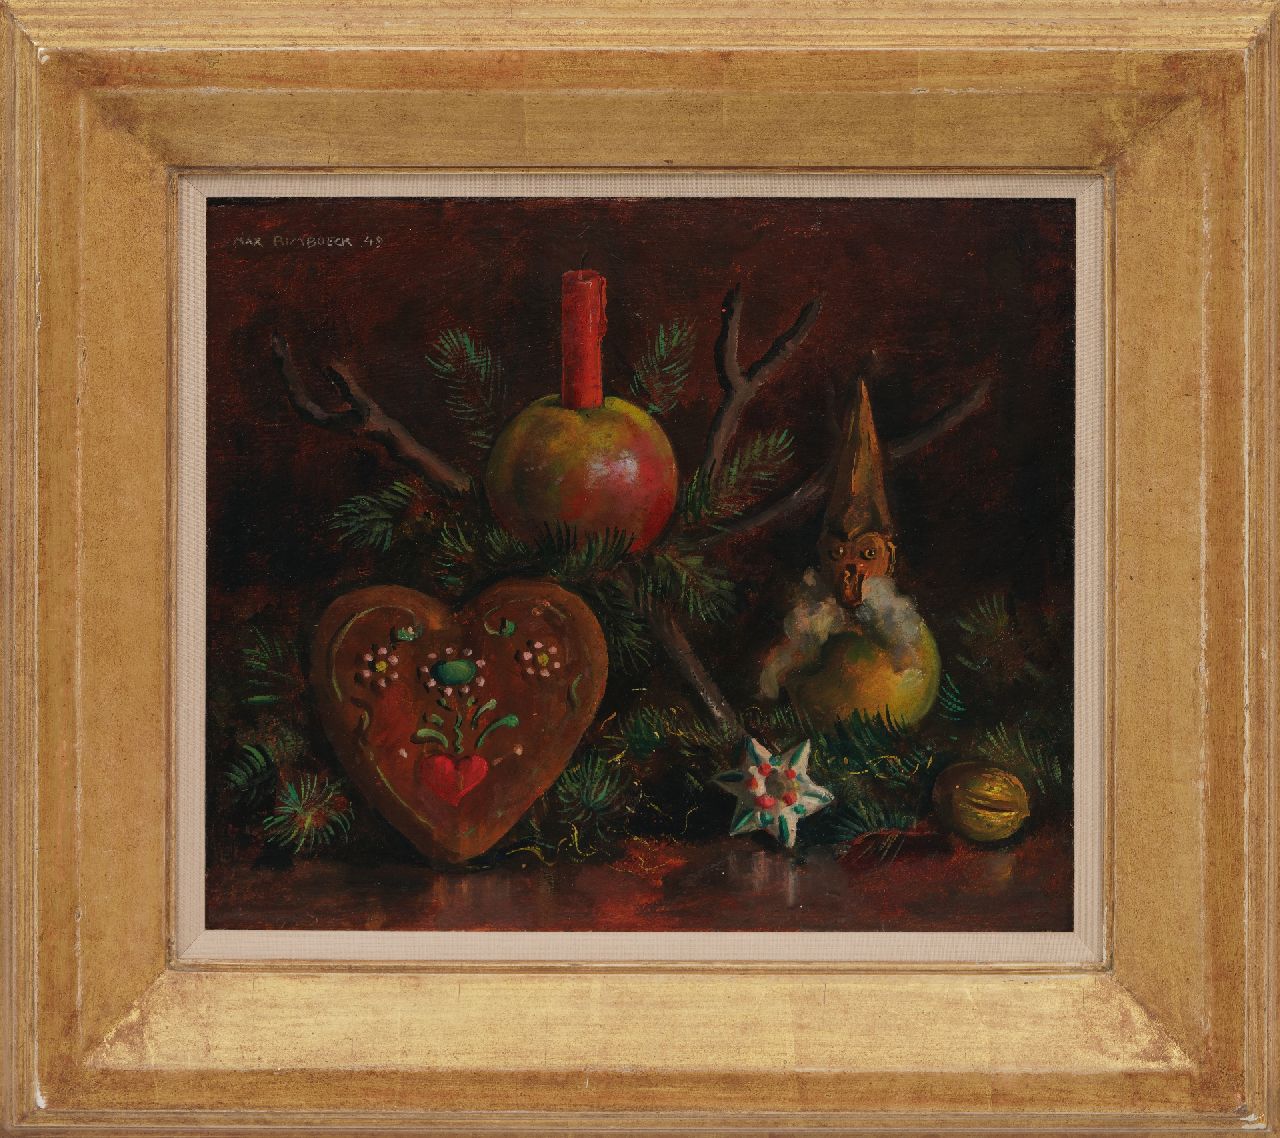 Rimböck M.  | Max Rimböck | Paintings offered for sale | Christmas still life, oil on painter's board 29.4 x 35.3 cm, signed u.l. and dated '49